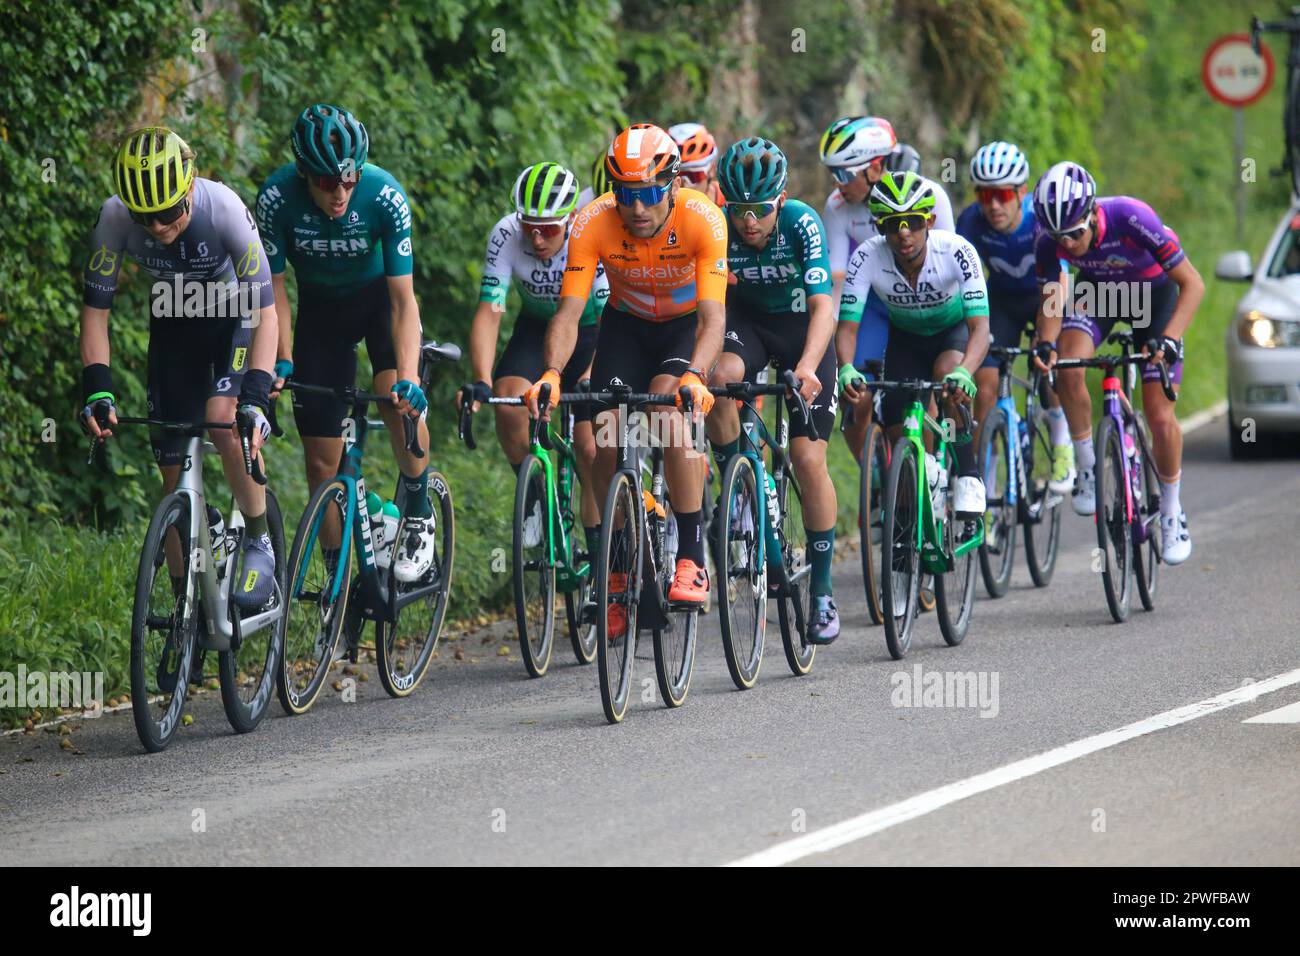 La Rodriga, Spain, 30th April, 2023: The escape led by Carl Fredrik Hagen (Q36.5 Pro Cycling Team, L) and Luis Angel Mate (Euskaltel - Euskadi, R) during the 3rd stage of the Vuelta a Asturias 2023 between Cangas del Narcea and Oviedo, on April 30, 2023, in La Rodriga, Spain. Credit: Alberto Brevers / Alamy Live News Stock Photo